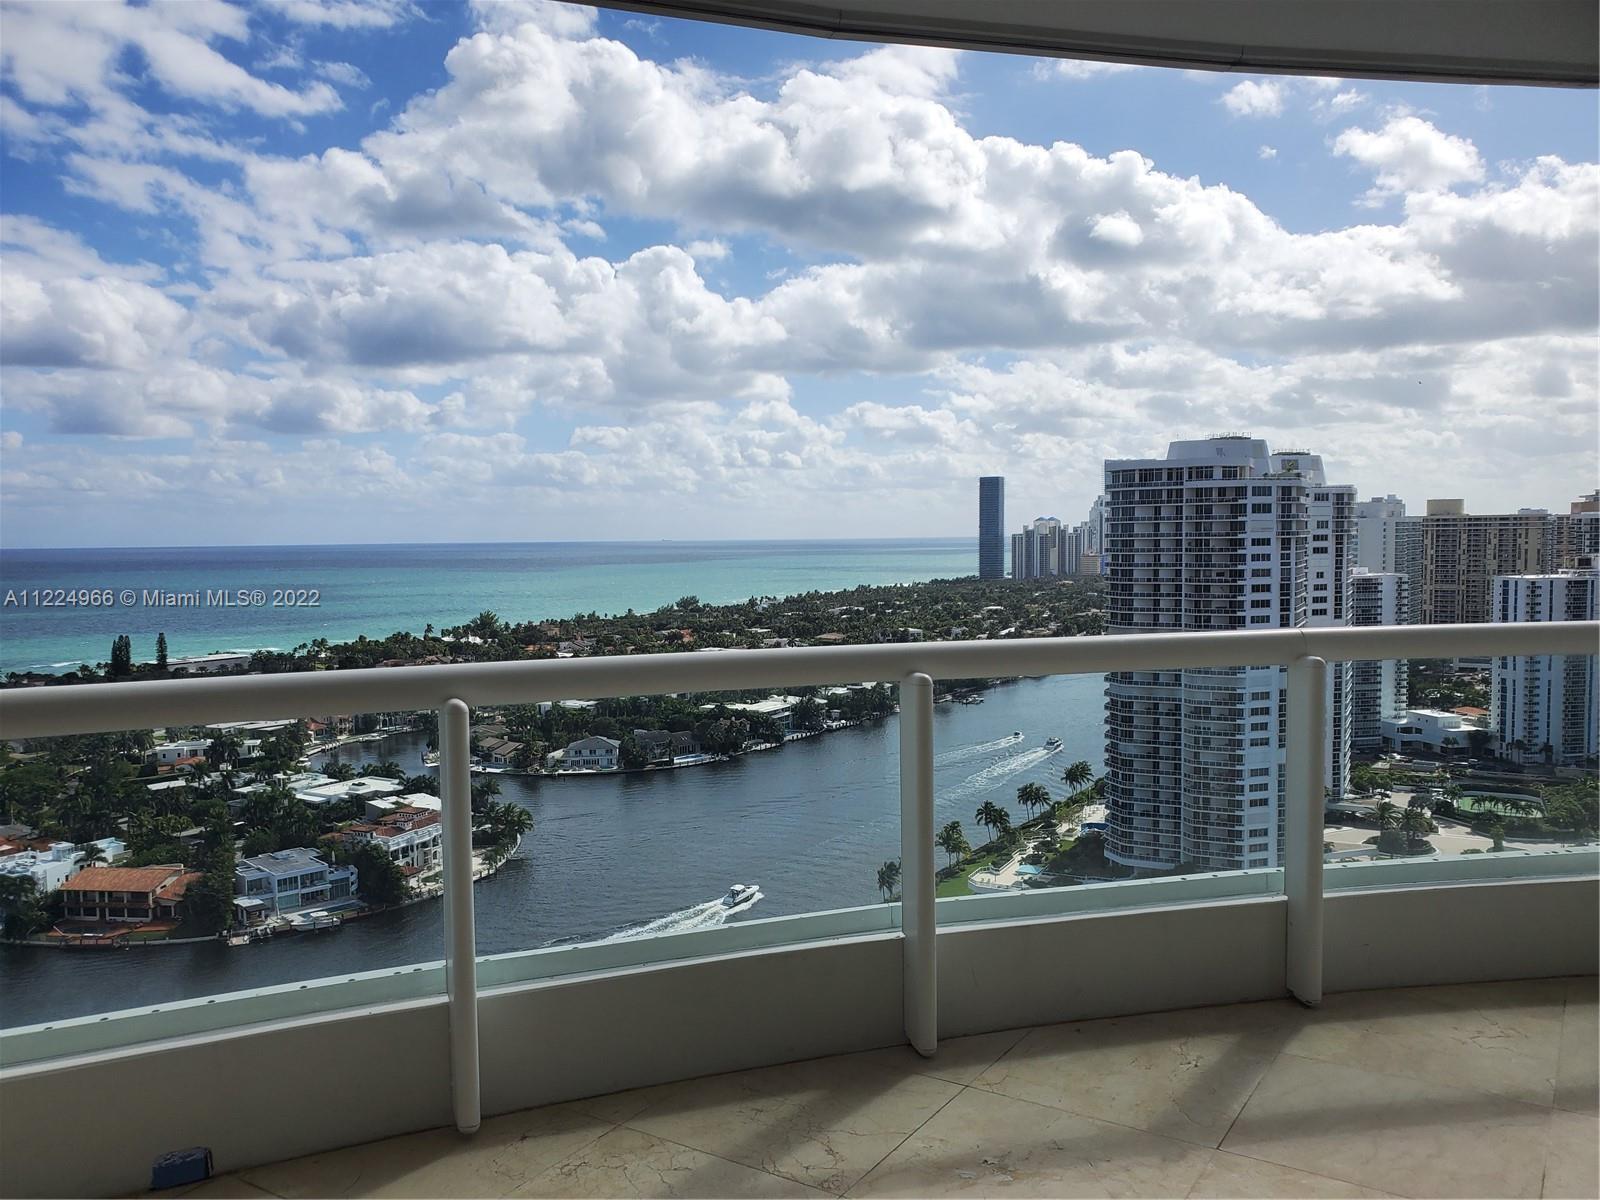 Amazing best line 28 floor Unit at Atlantic lll at The Point! Very spacious 2,440 SF 3 BBR+2.5 Baths